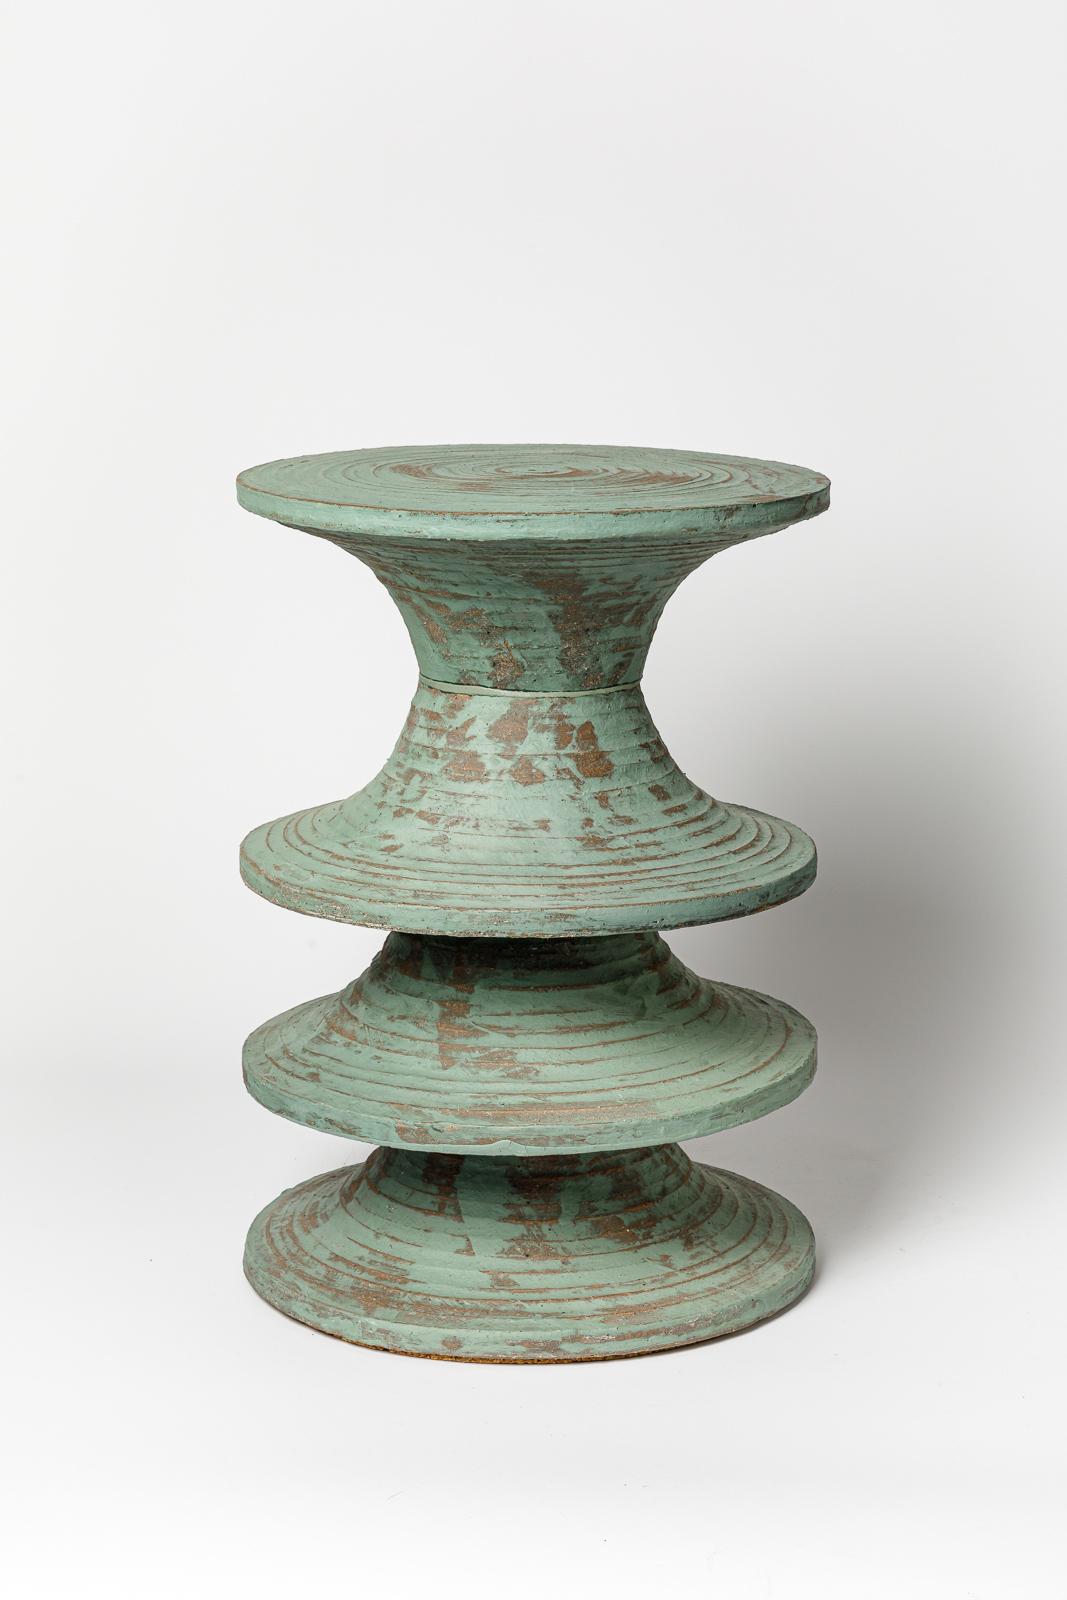 Contemporary Green engobed stoneware stool by Mart Schrijvers, 2023. For Sale